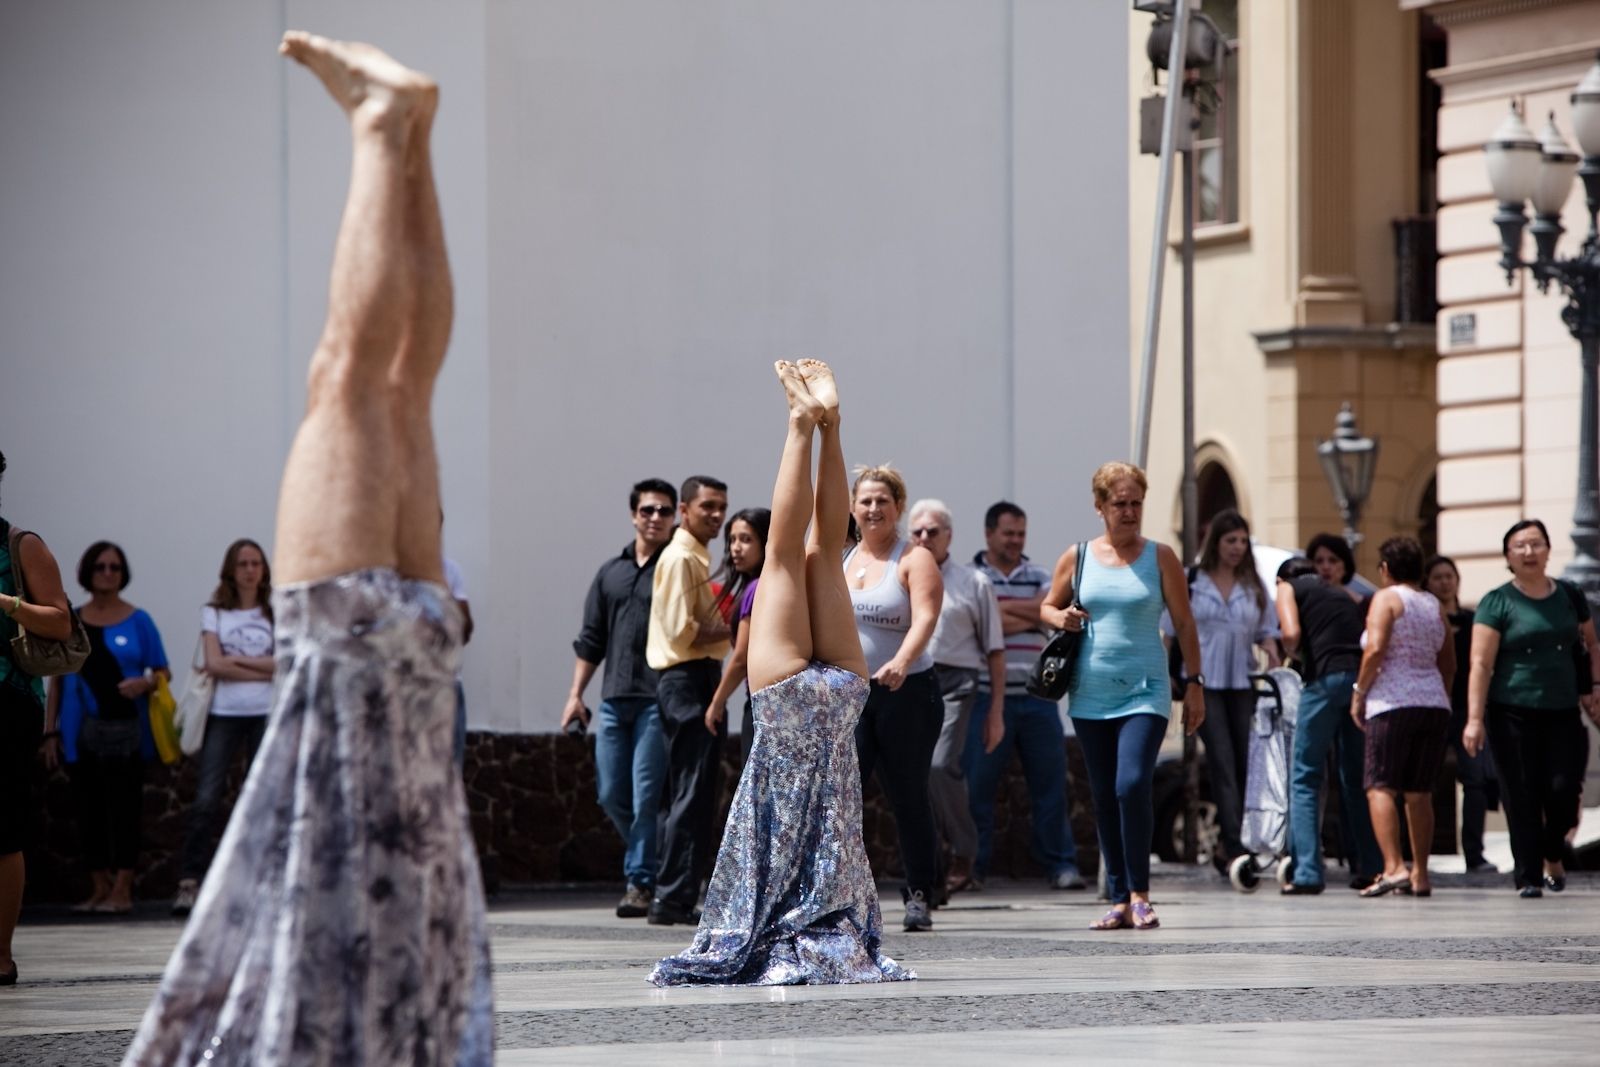 Outdoor performance with artists remaining in a headstand for as long as they can. Passersby watching and discovering the artwork.